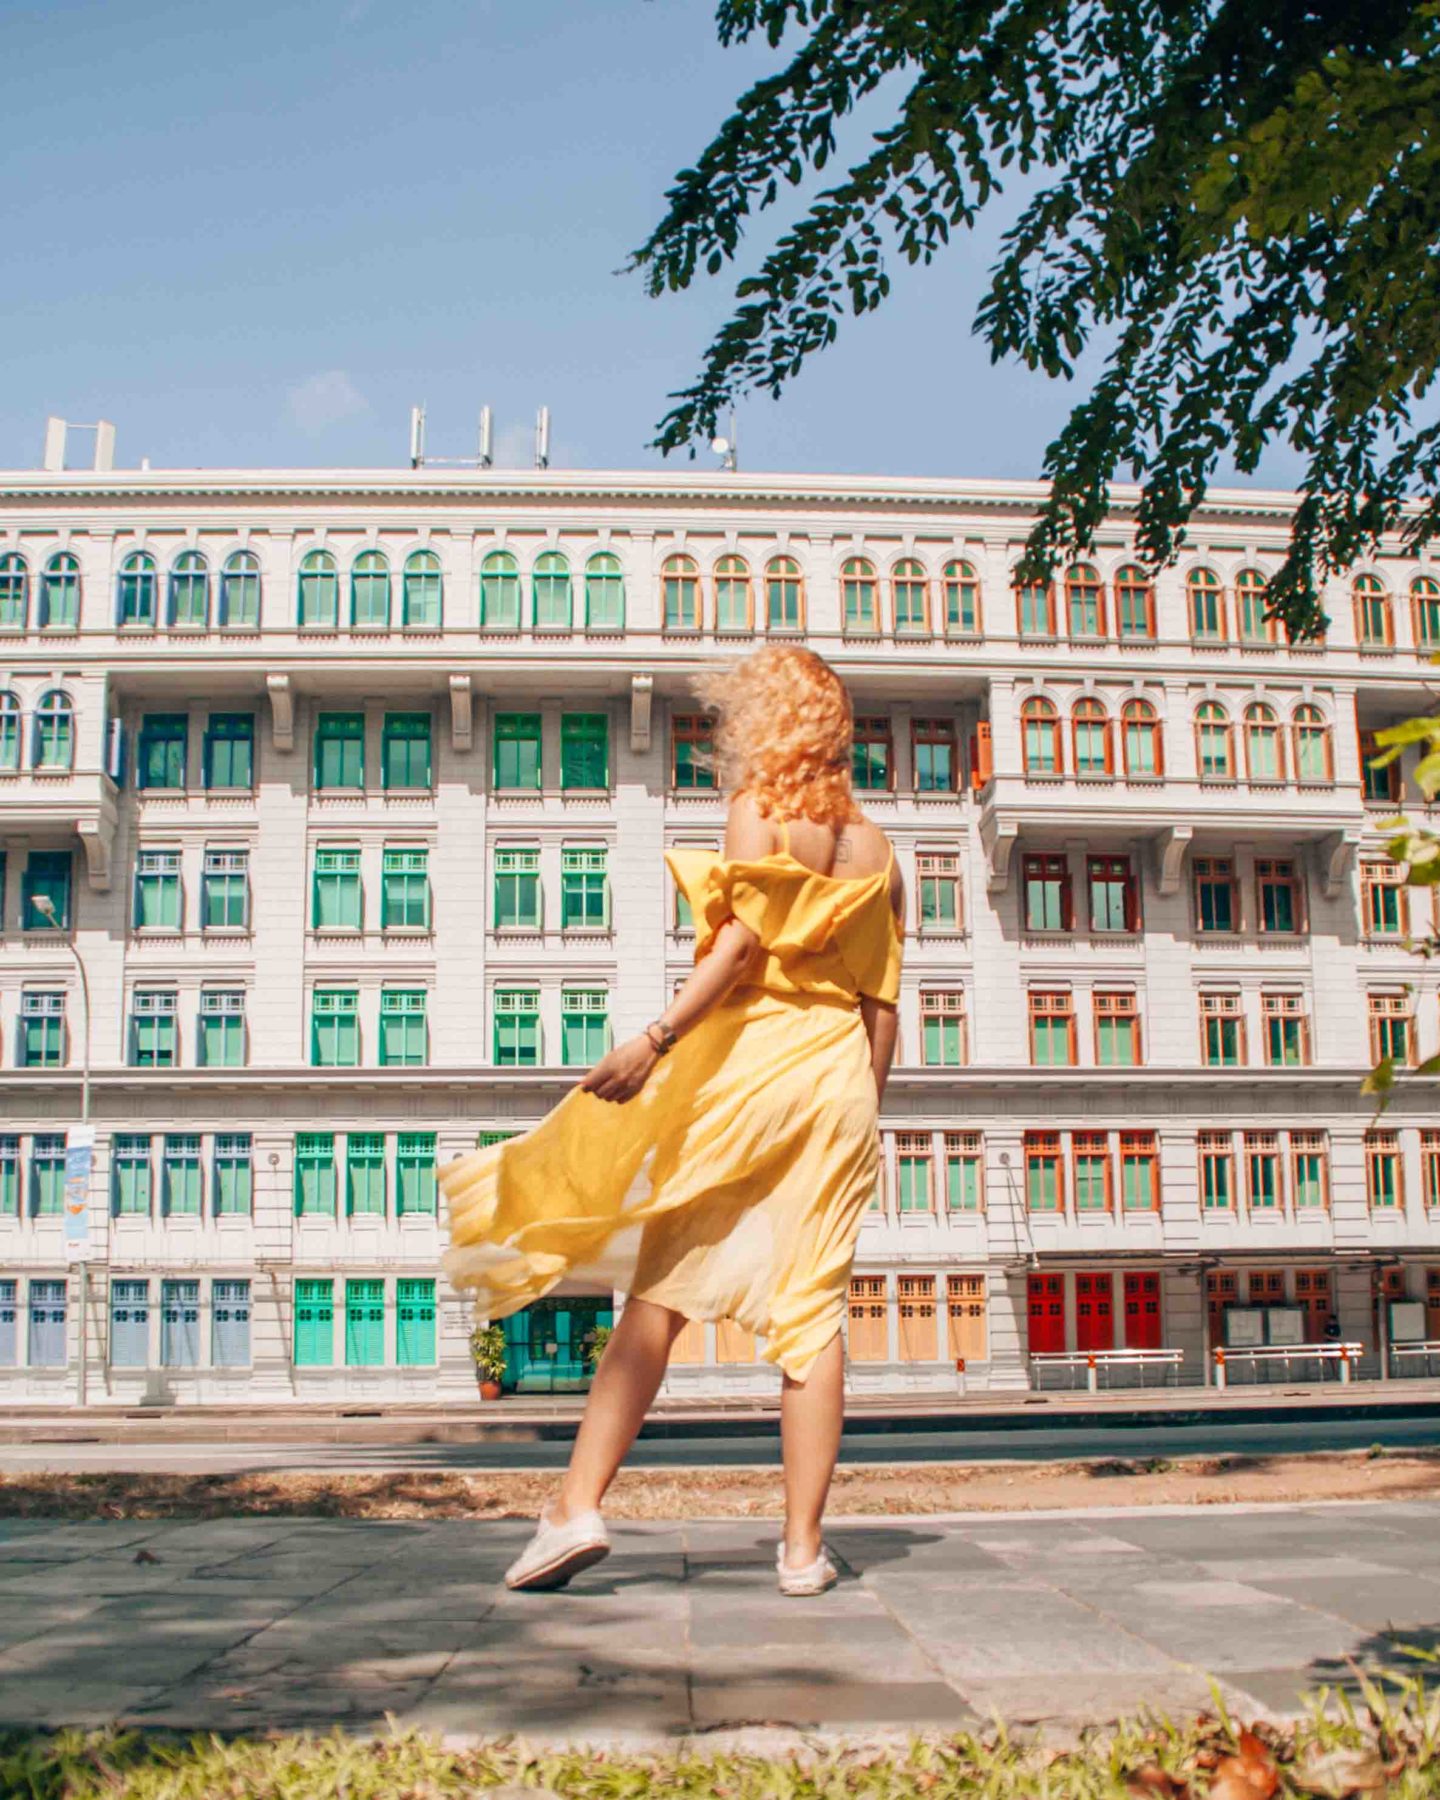 The 15 most instagrammable spots in Singapore - Blondie Wanderlust